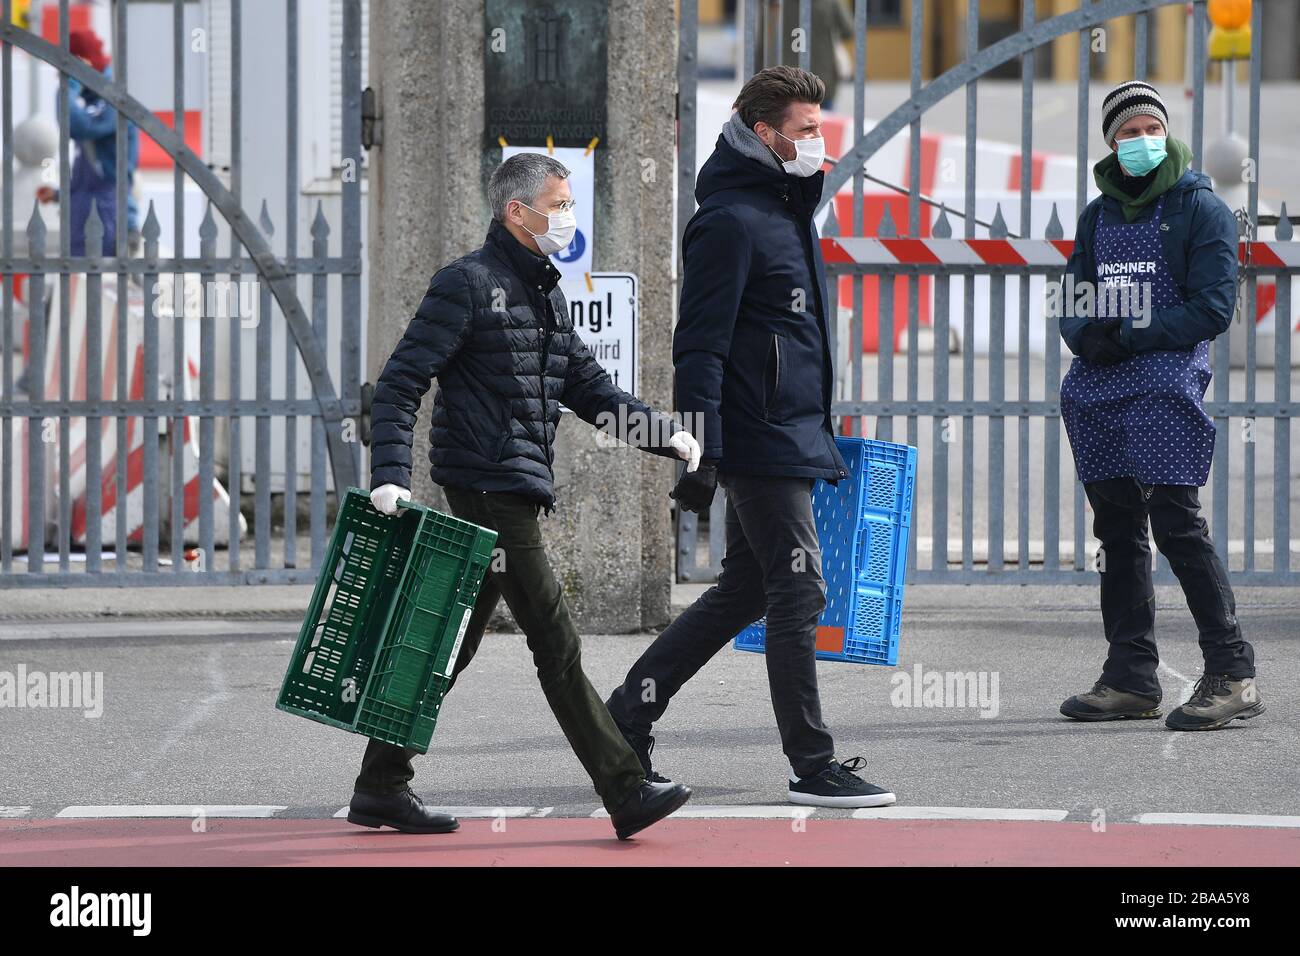 from left: Herbert HAINER (President FC Bayern Munich) and Marko PESIC with empty vegetable crates. Both wear face masks, protective masks. Re: a helper of the Muenchner Tafel. FC Bayern Munich Basketball is helping the Muenchener Tafel on 26.03.2020 in the wholesale market in Muenchen. @Sven Simon Photo Agency. GmbH & Co. Press Photo KG # Prinzess-Luise-Str. 41 # 45479 M uelheim/R uhr # Tel. 0208/9413250 # Fax. 0208/9413260 # GLS Bank # BLZ 430 609 67 # Kto. 4030 025 100 # IBAN DE75 4306 0967 4030 0251 00 # BIC GENODEM1GLS # www.svensimon.net. | usage worldwide Stock Photo